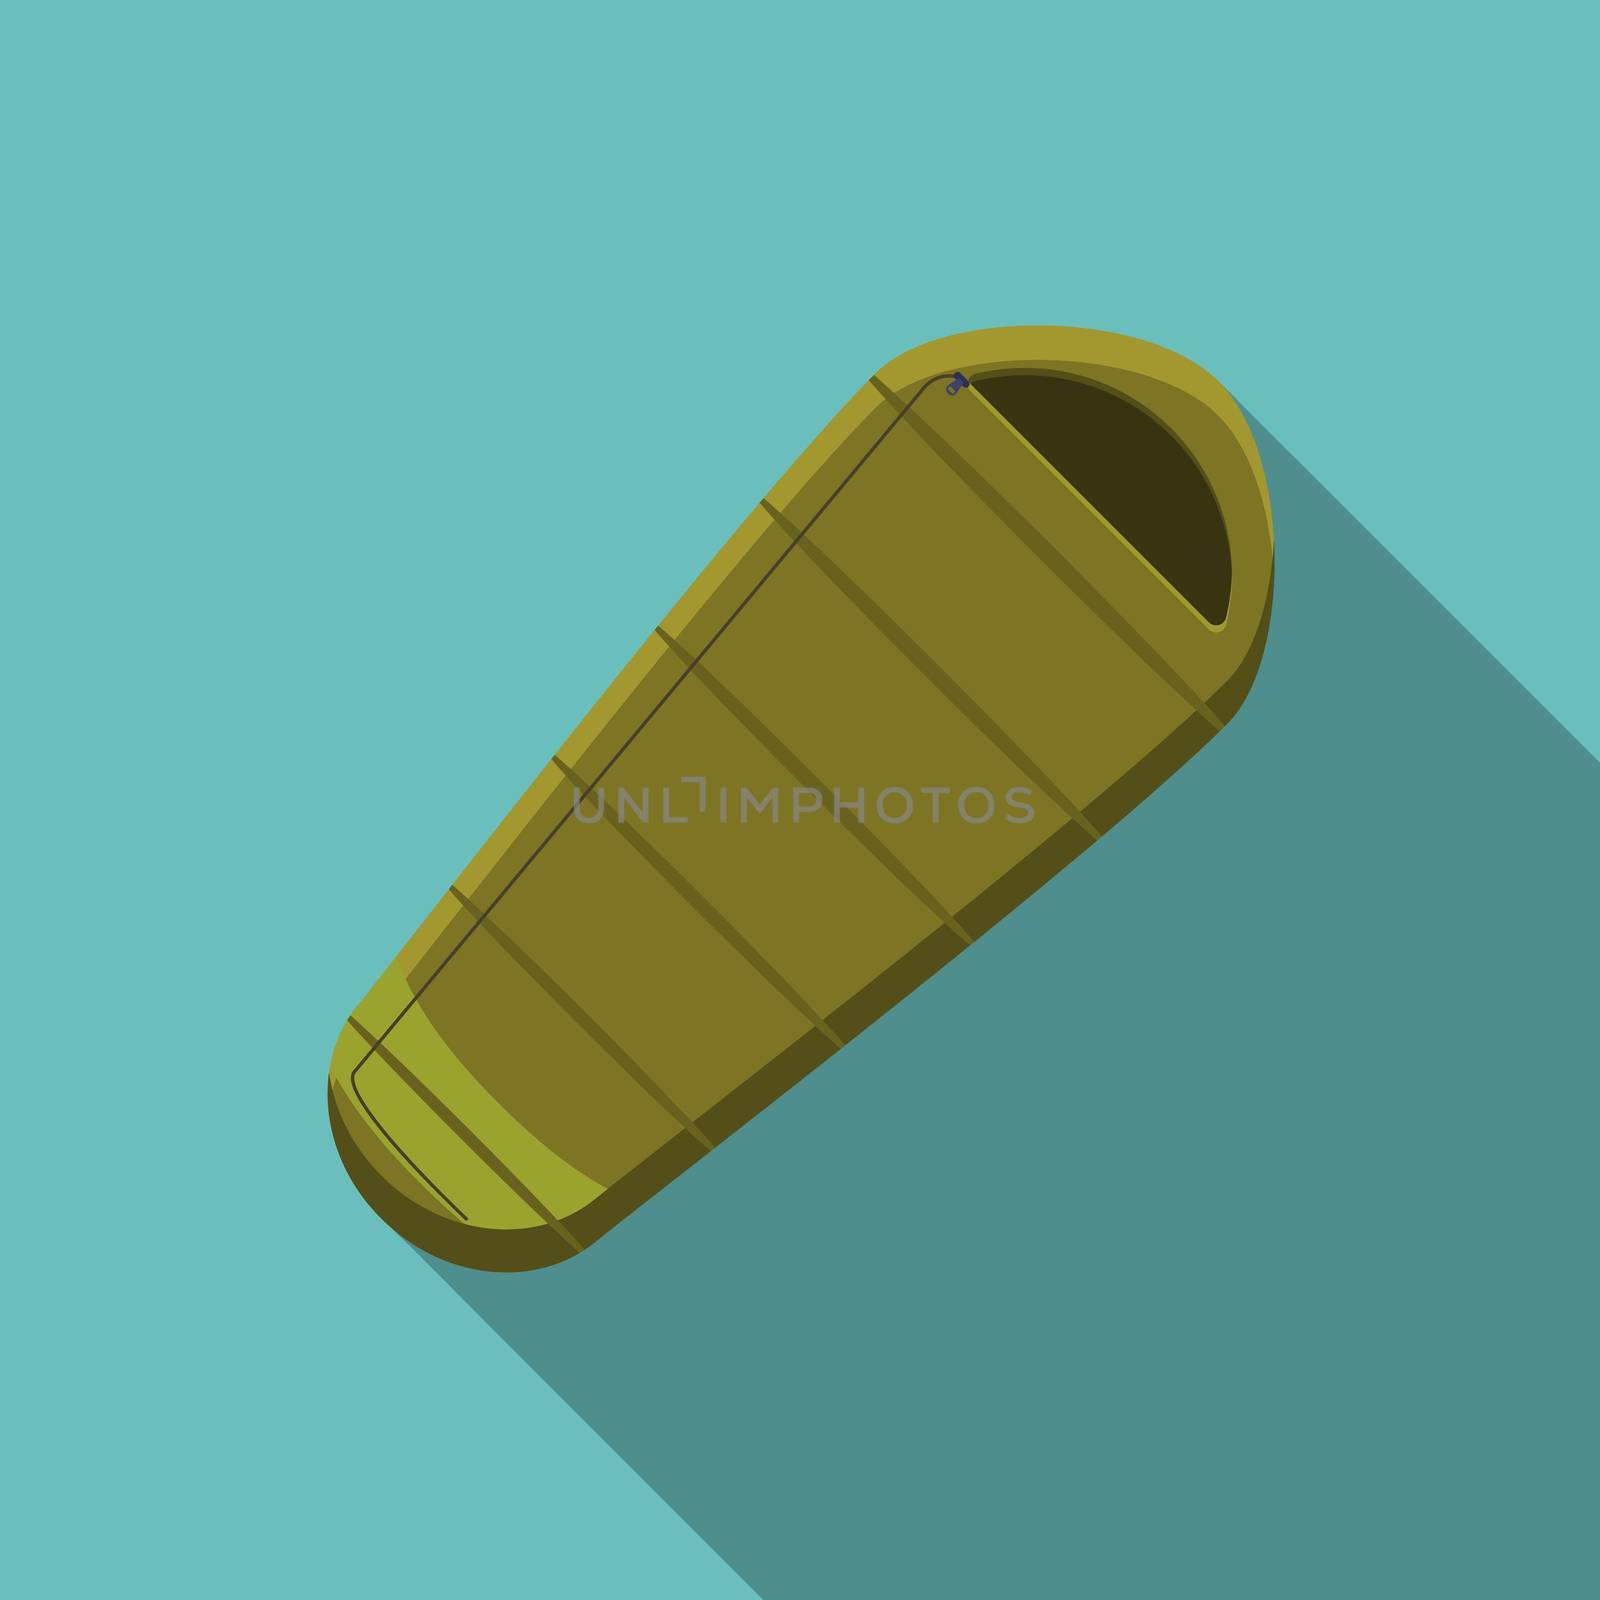 Flat design modern vector illustration of sleeping bag icon, camping and hiking equipment with long shadow by Lemon_workshop